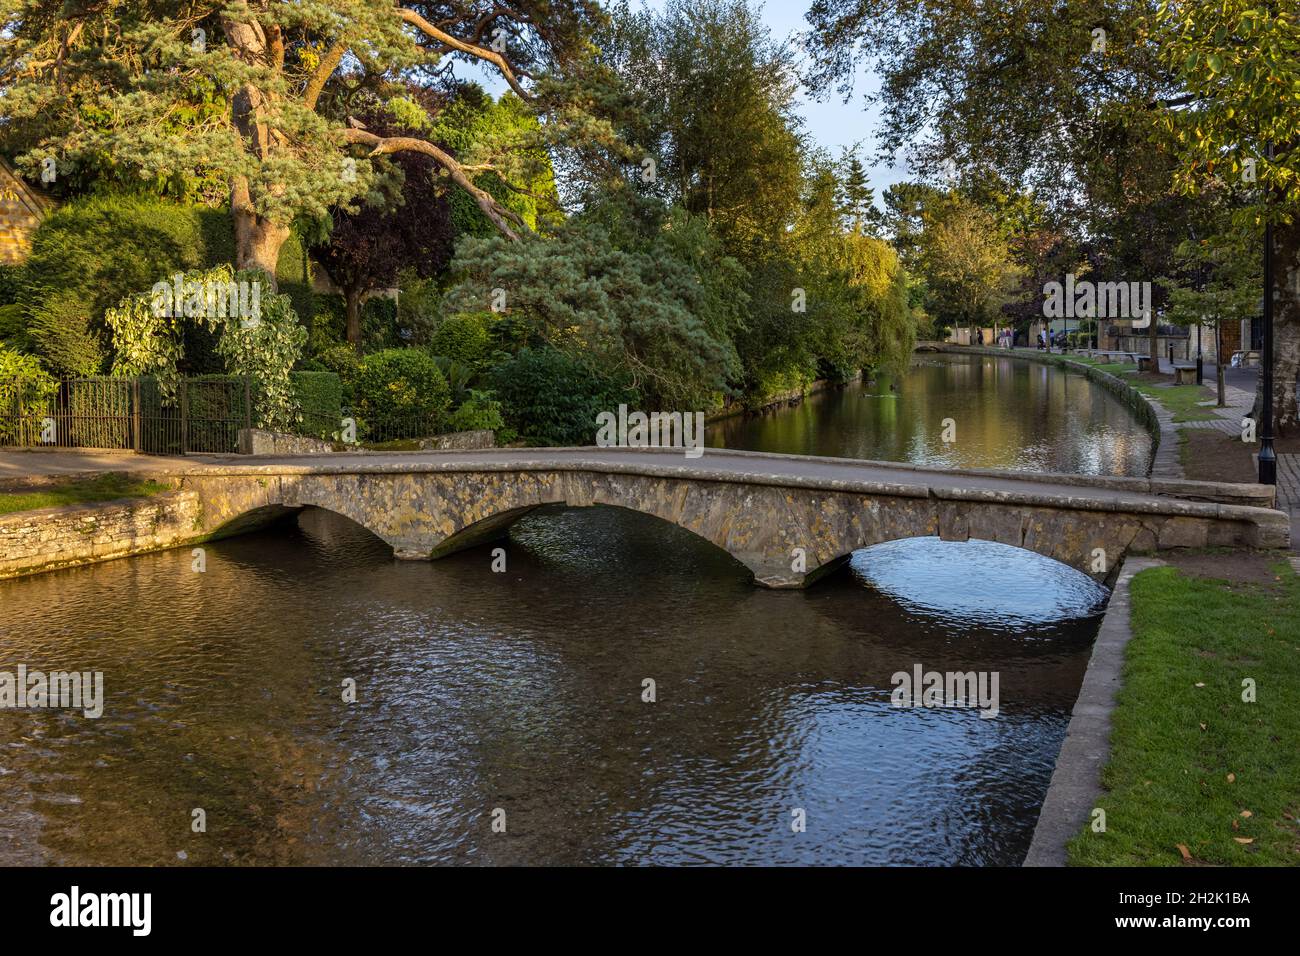 An arched stone bridge crossing the River Windrush in the picturesque Cotswolds Village of Bourton-on-the-Water, Gloucestershire, England. Stock Photo